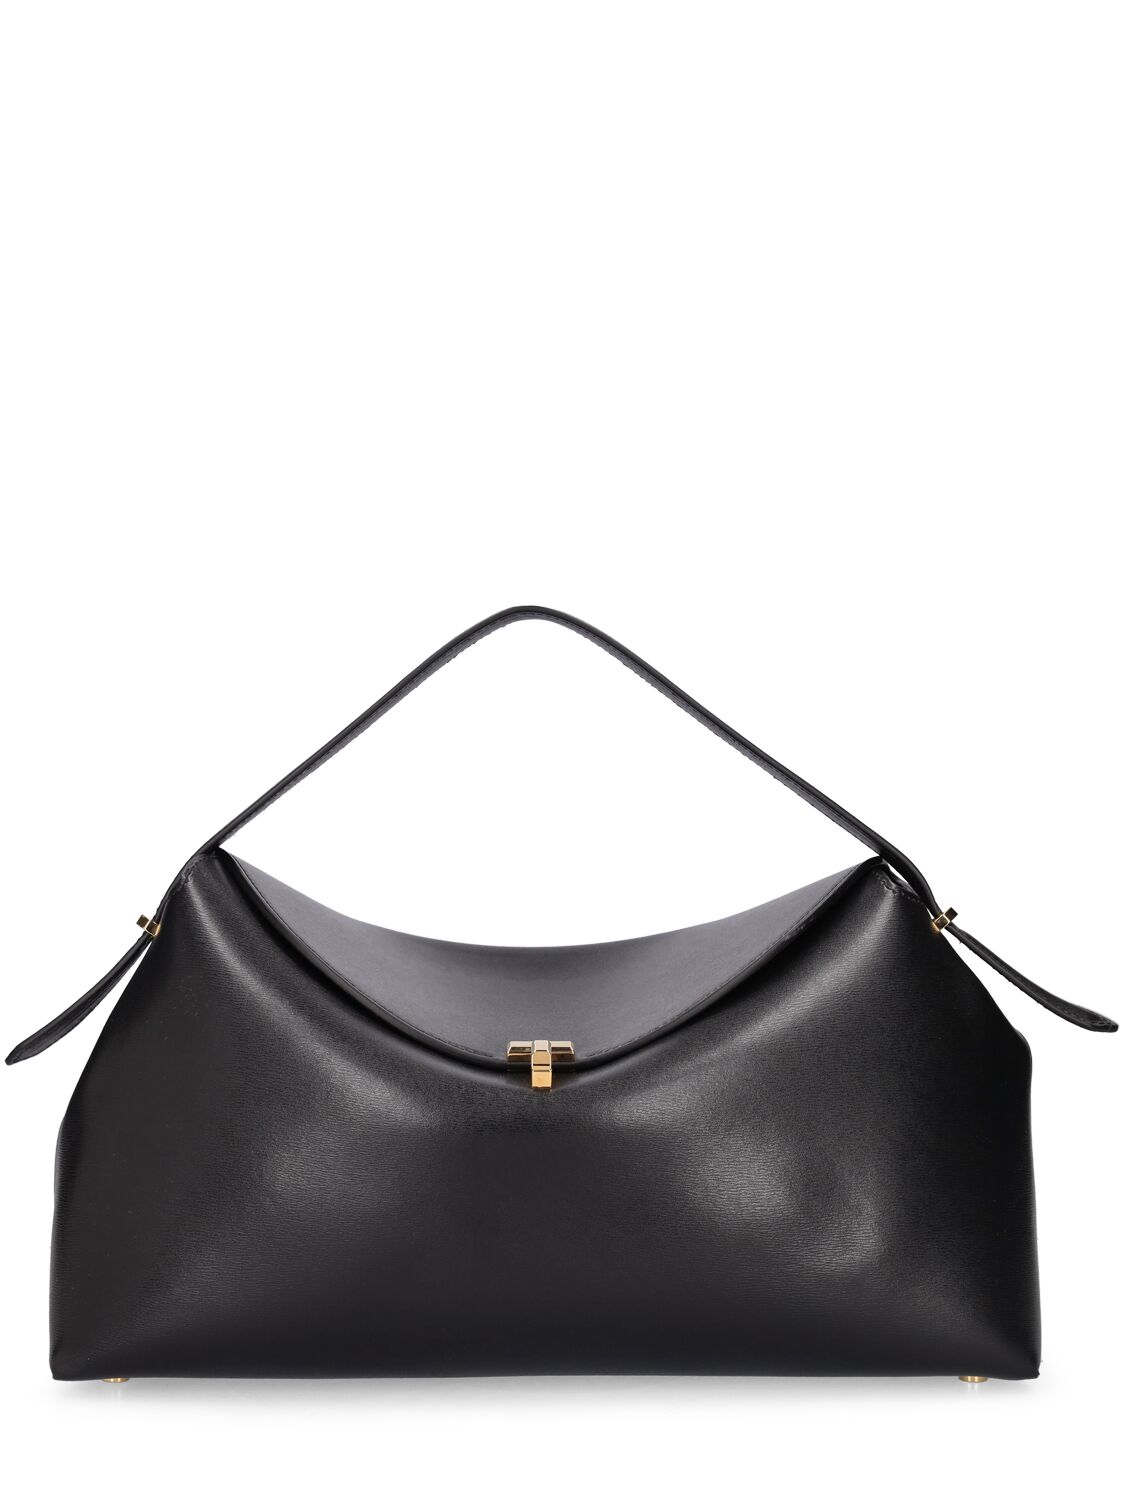 Image of T-lock Palmellata Leather Top Handle Bag